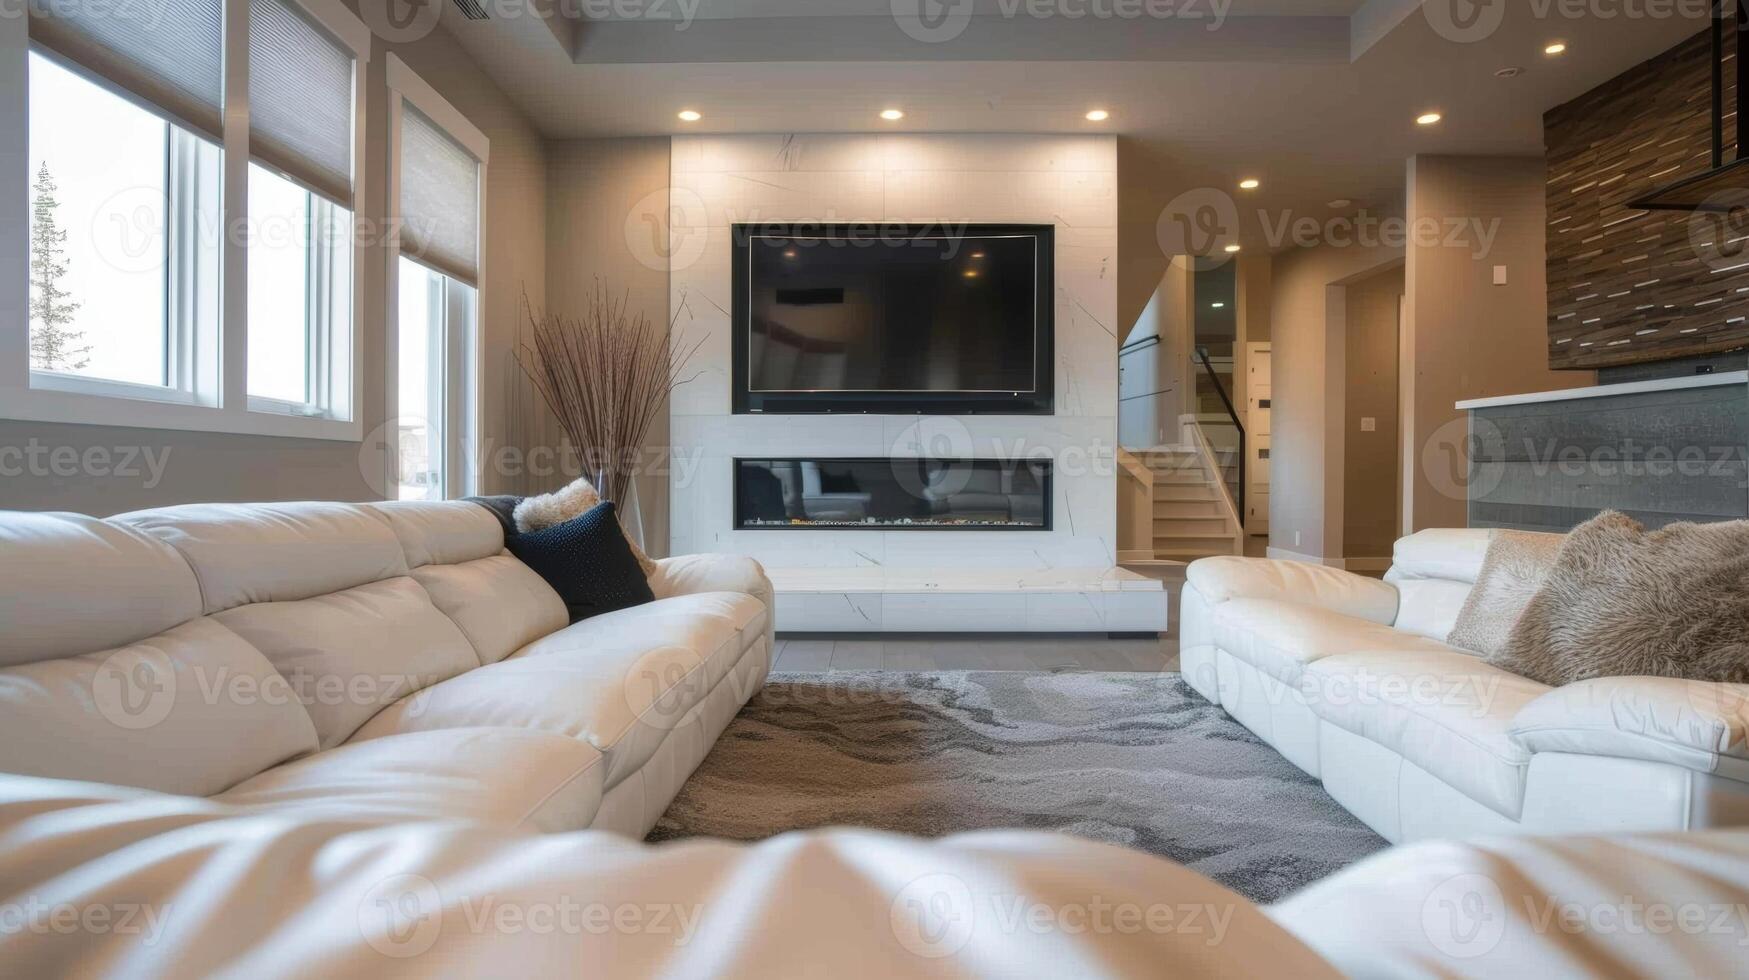 Plush white sofas face the sleek fireplace in the entertainment room providing a comfortable spot to snuggle up and watch movies. 2d flat cartoon photo